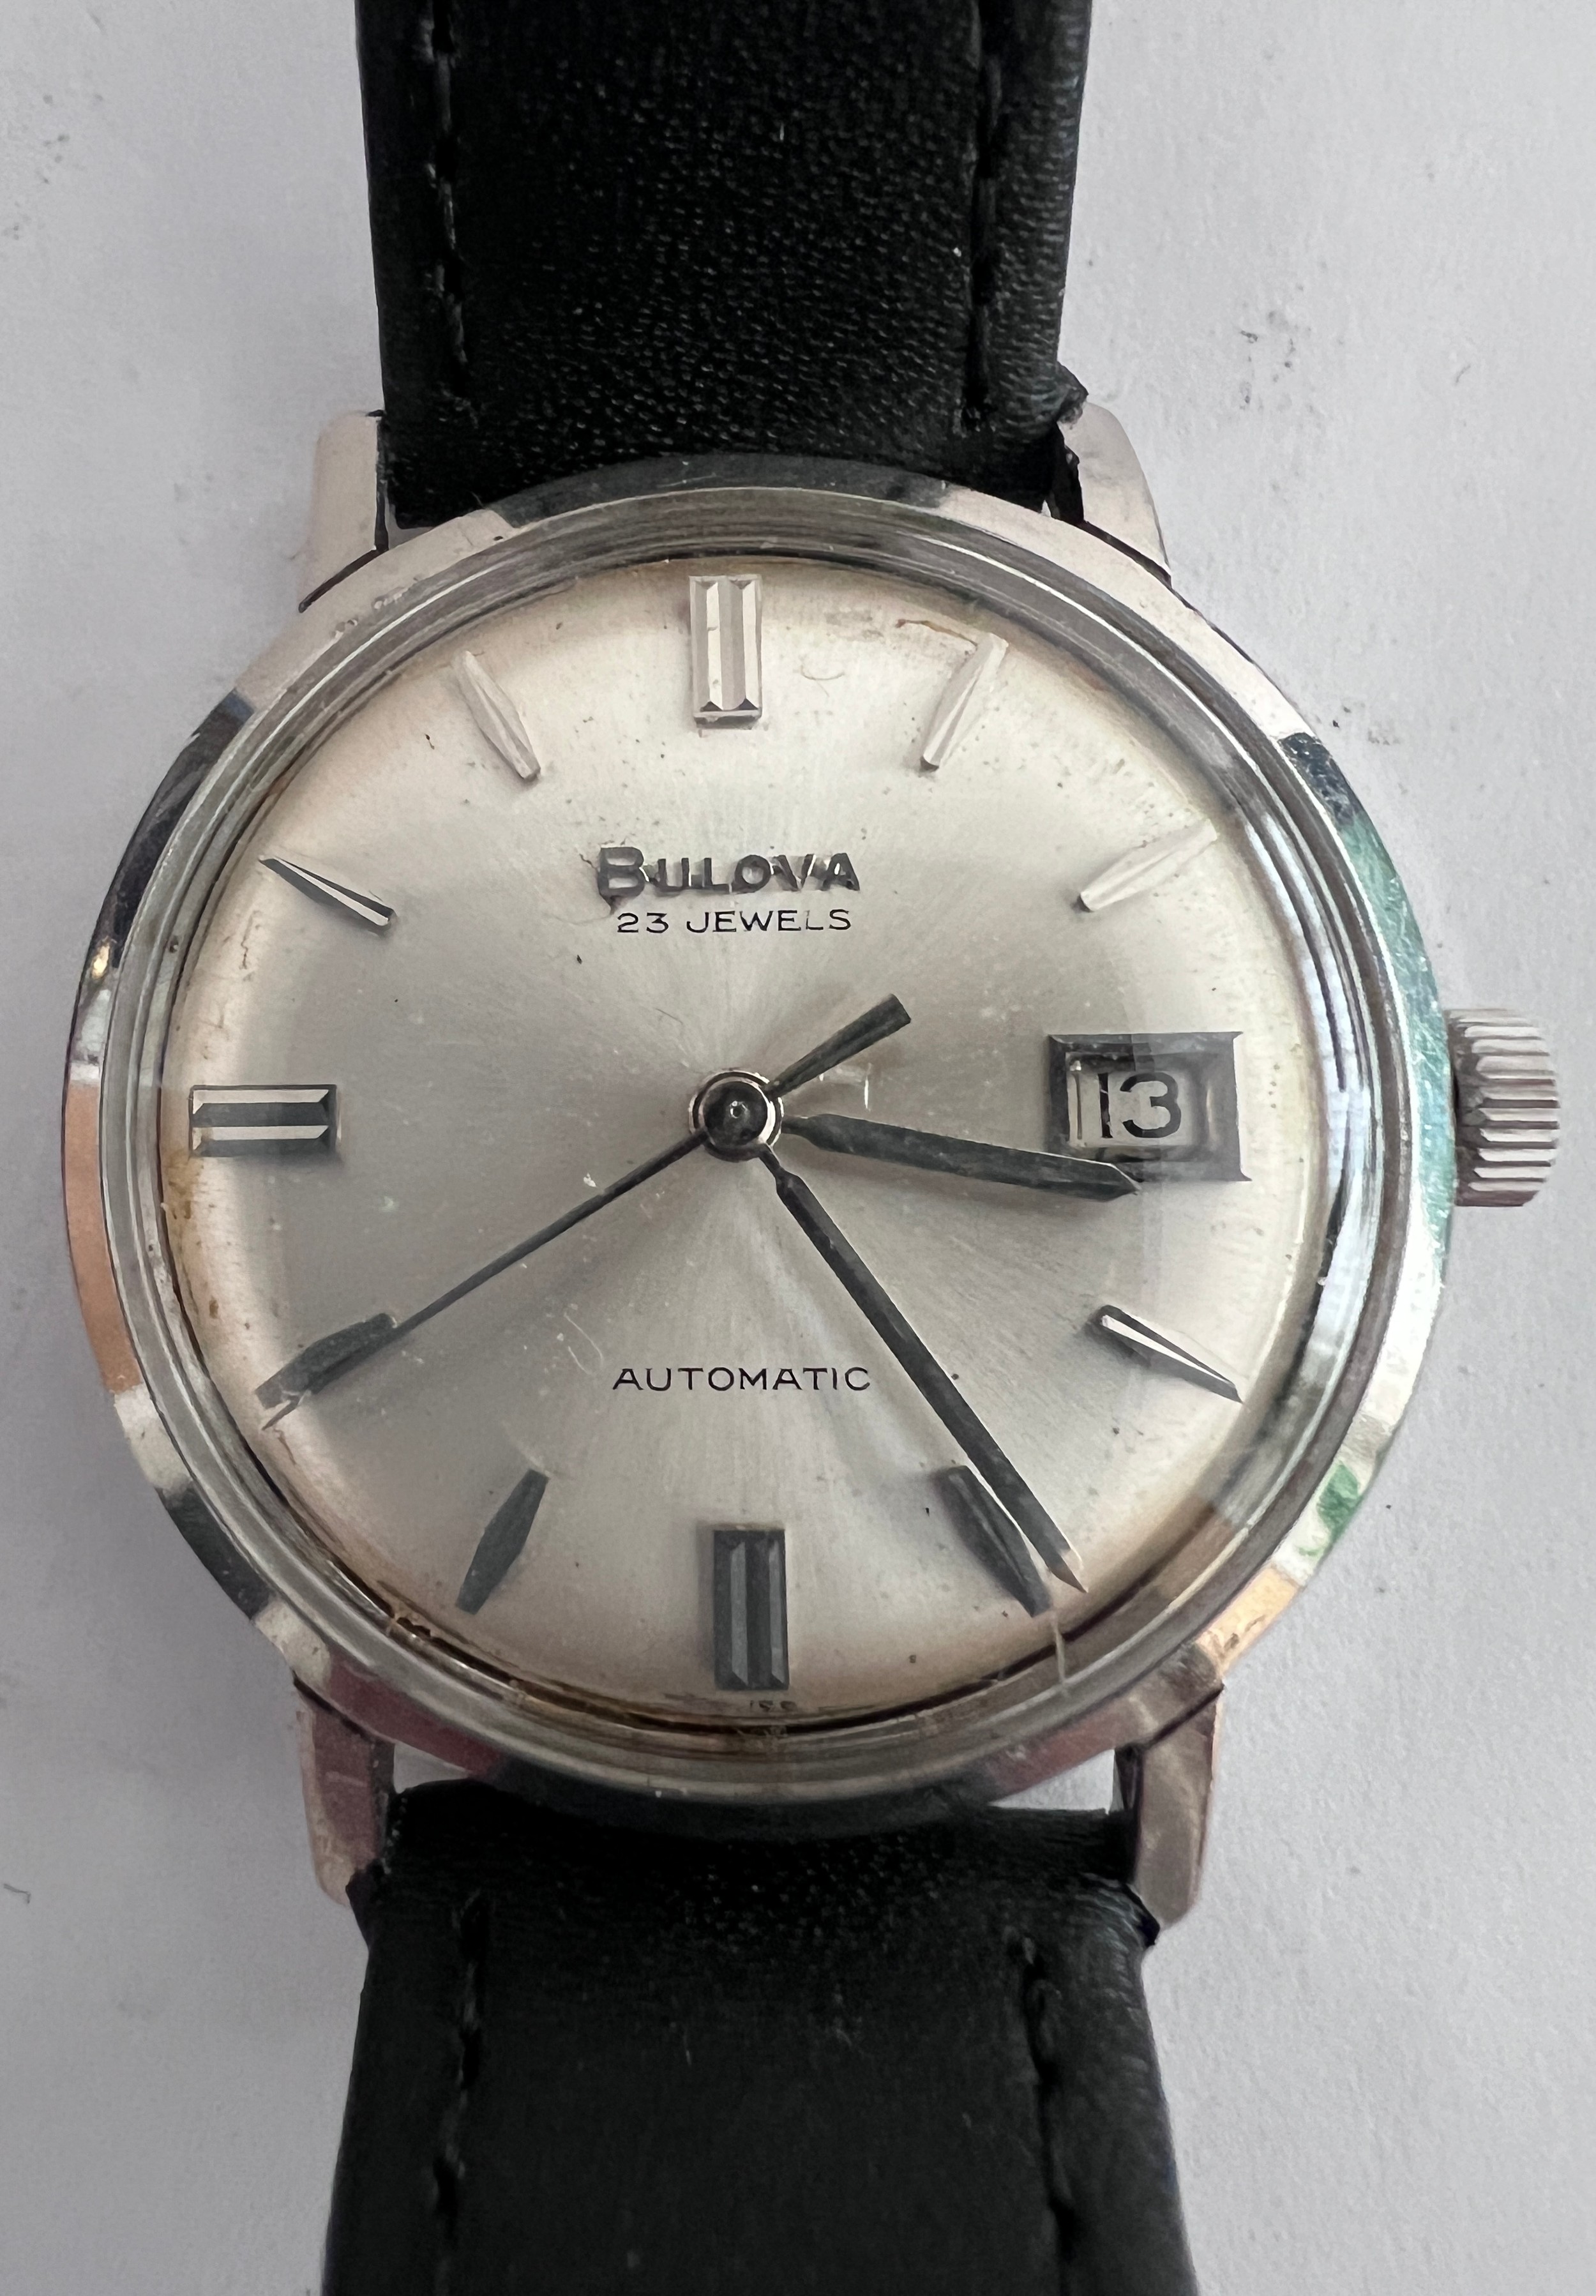 A gentleman's automatic vintage Bulova wristwatch with date aperture, 23 jewels. Not currently